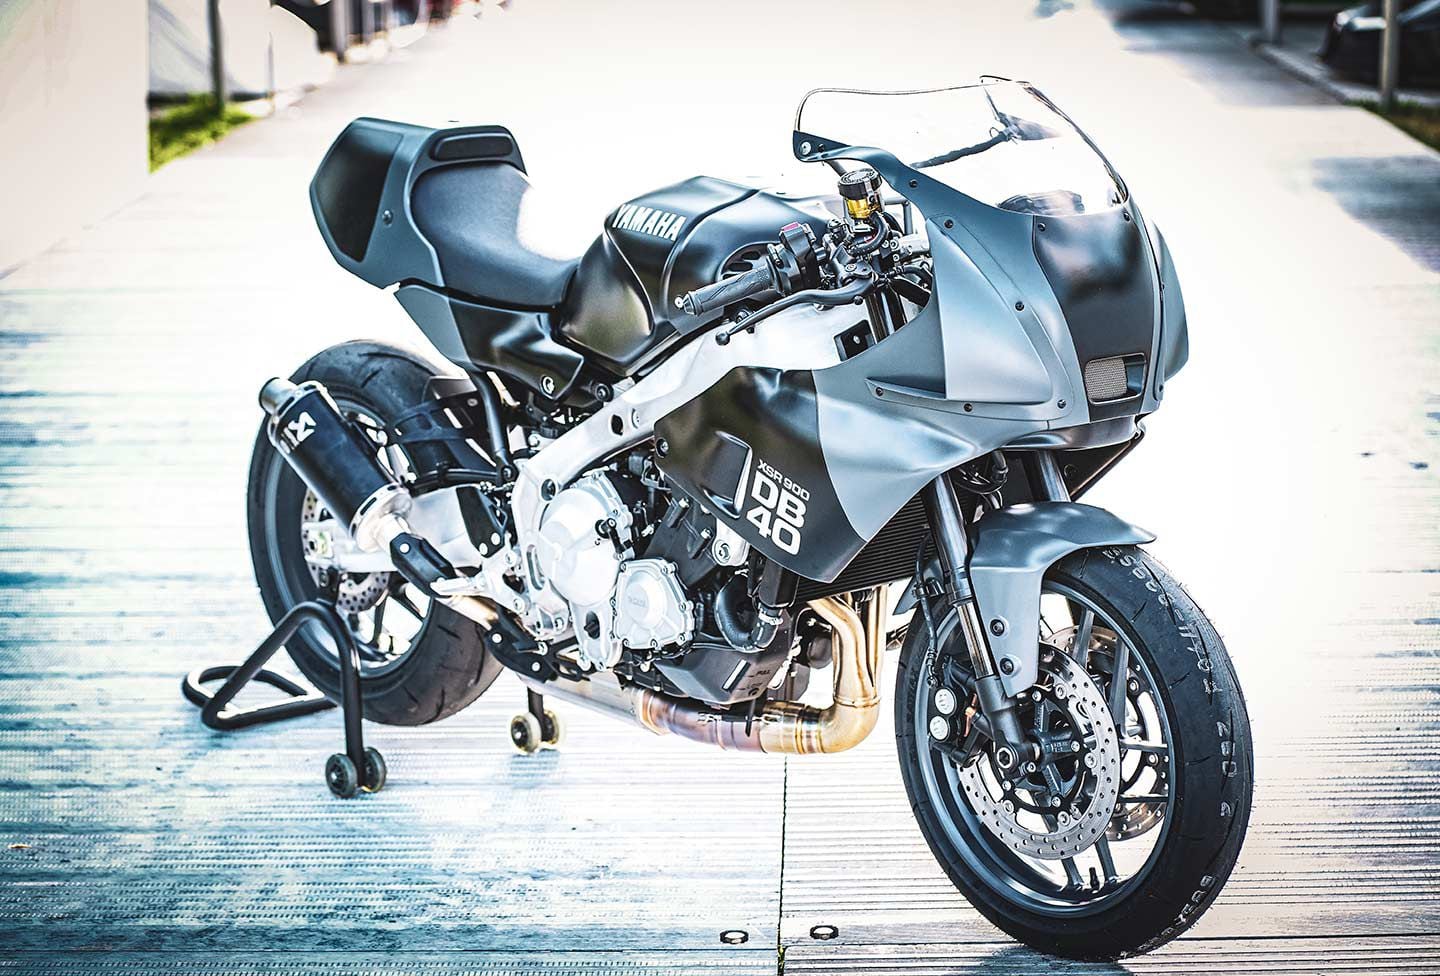 A closer look at the XSR900 DB40’s bodywork.